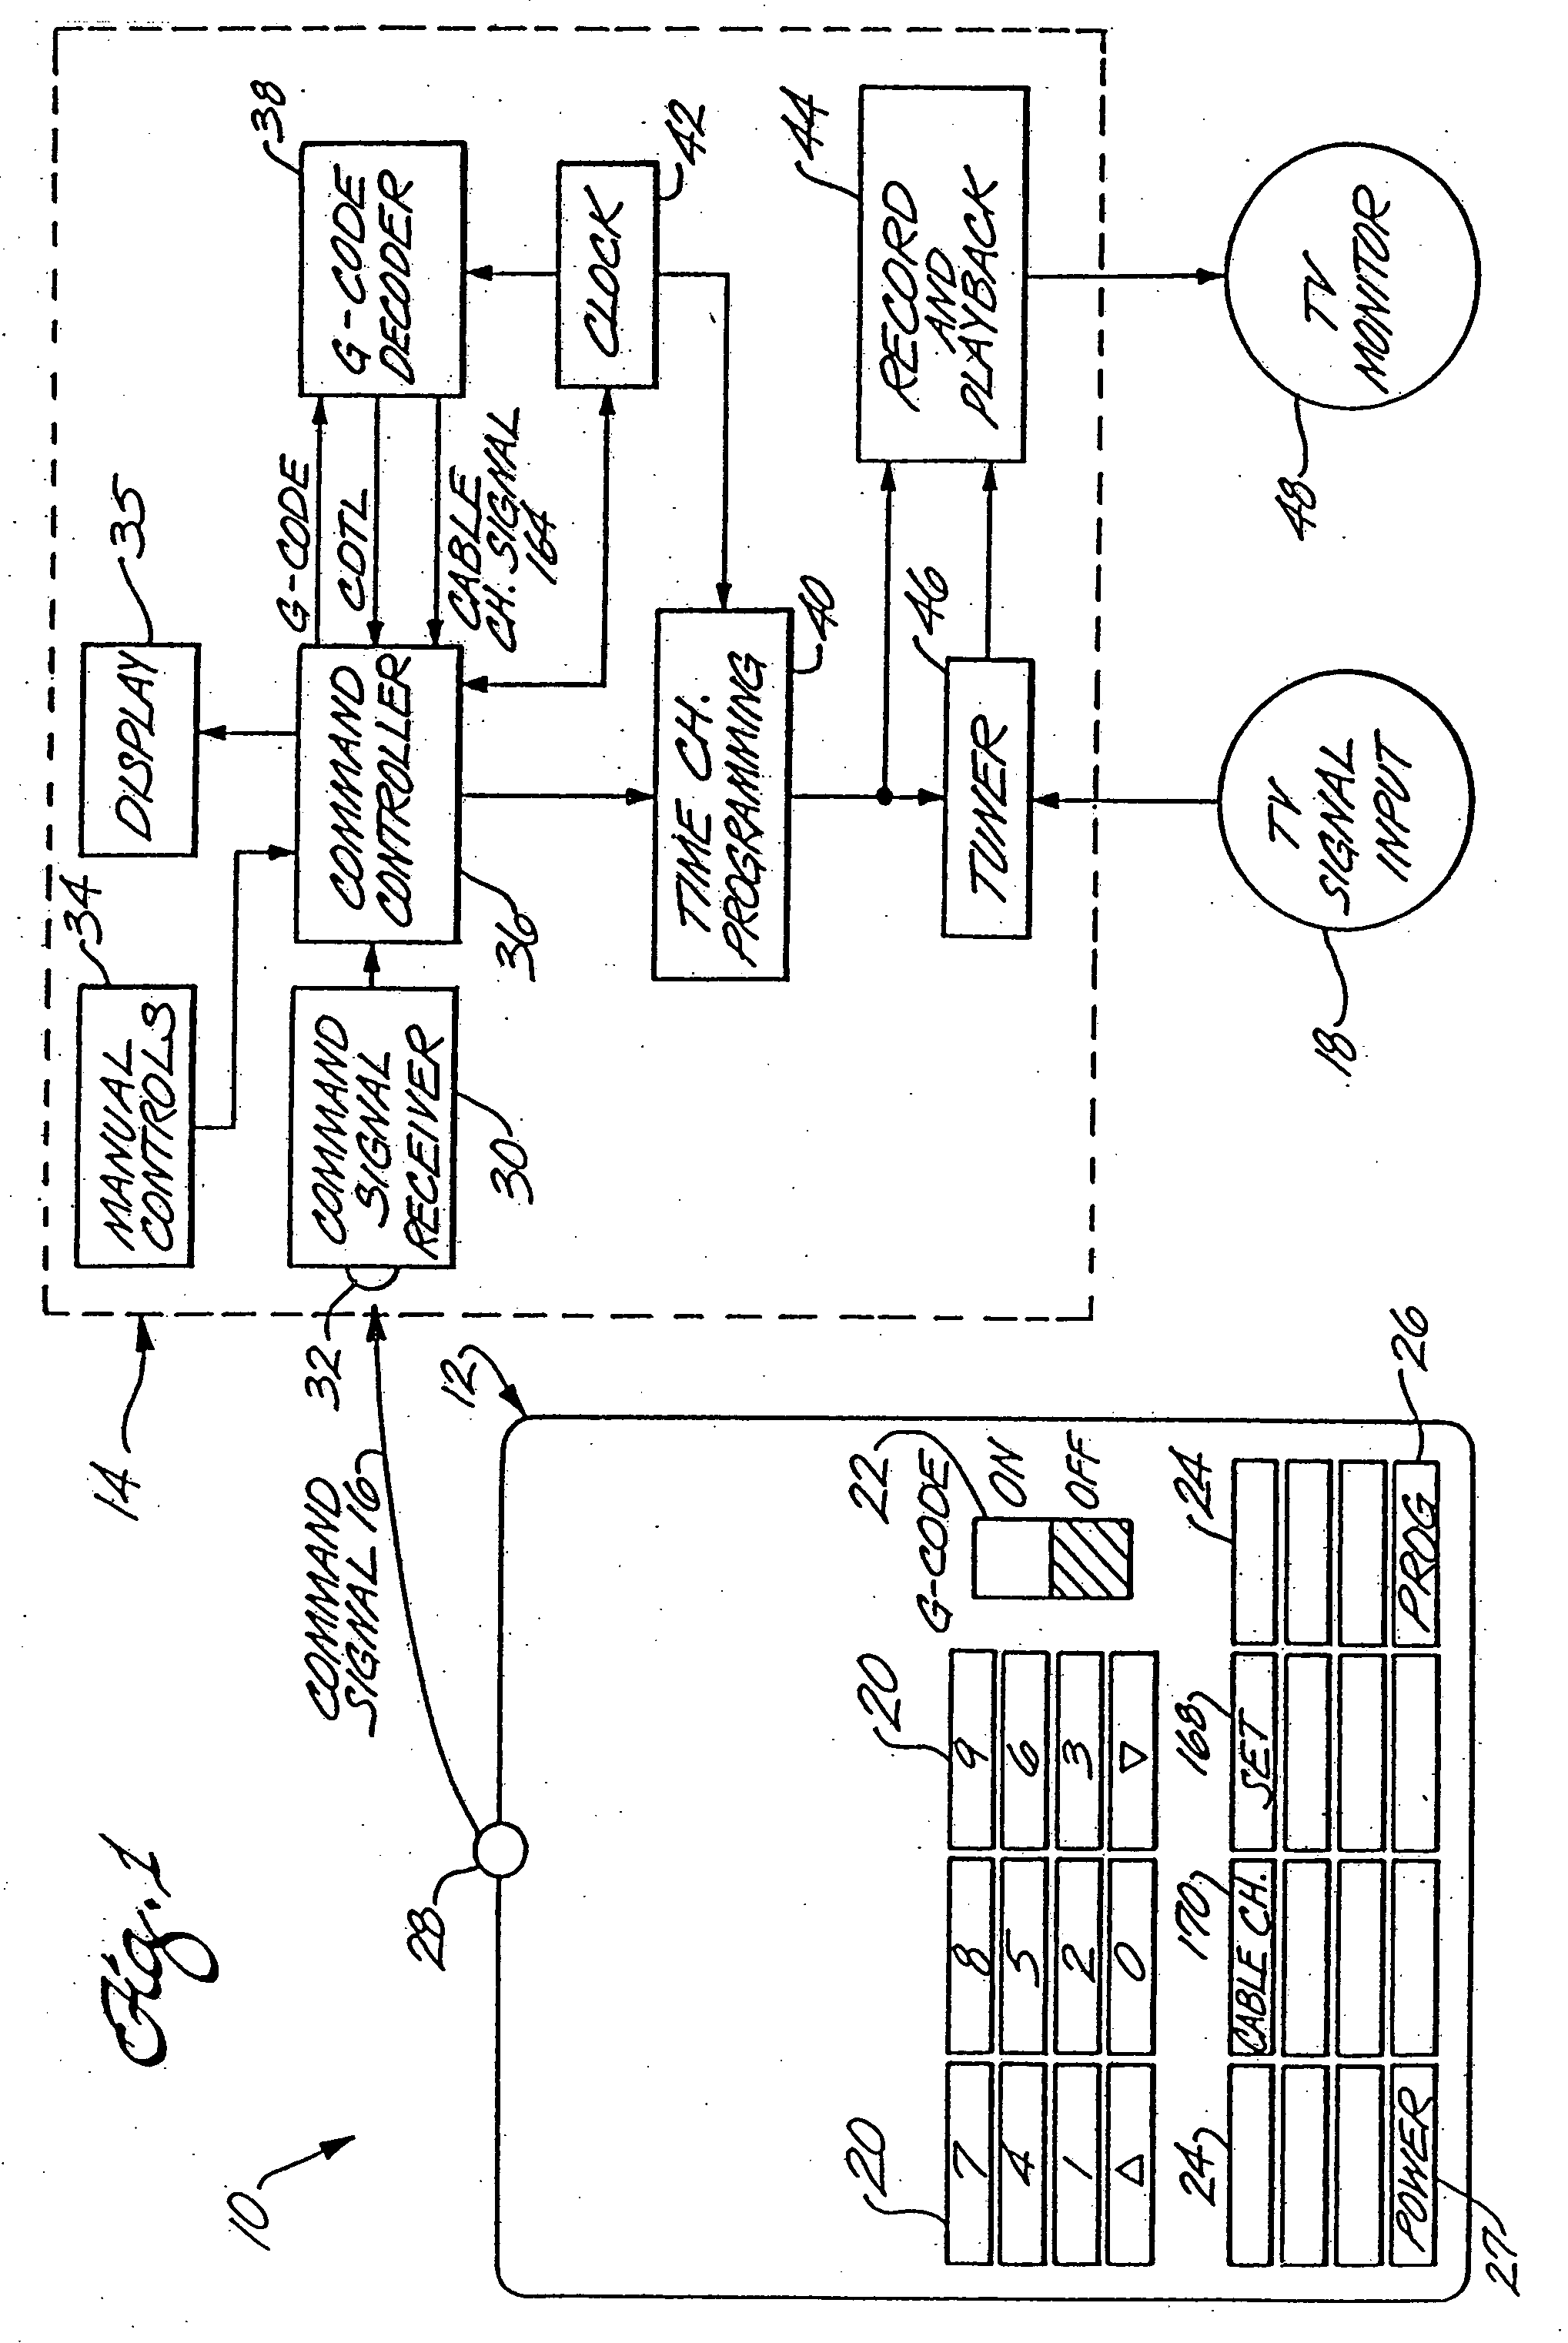 System and method for searching a database of television schedule information